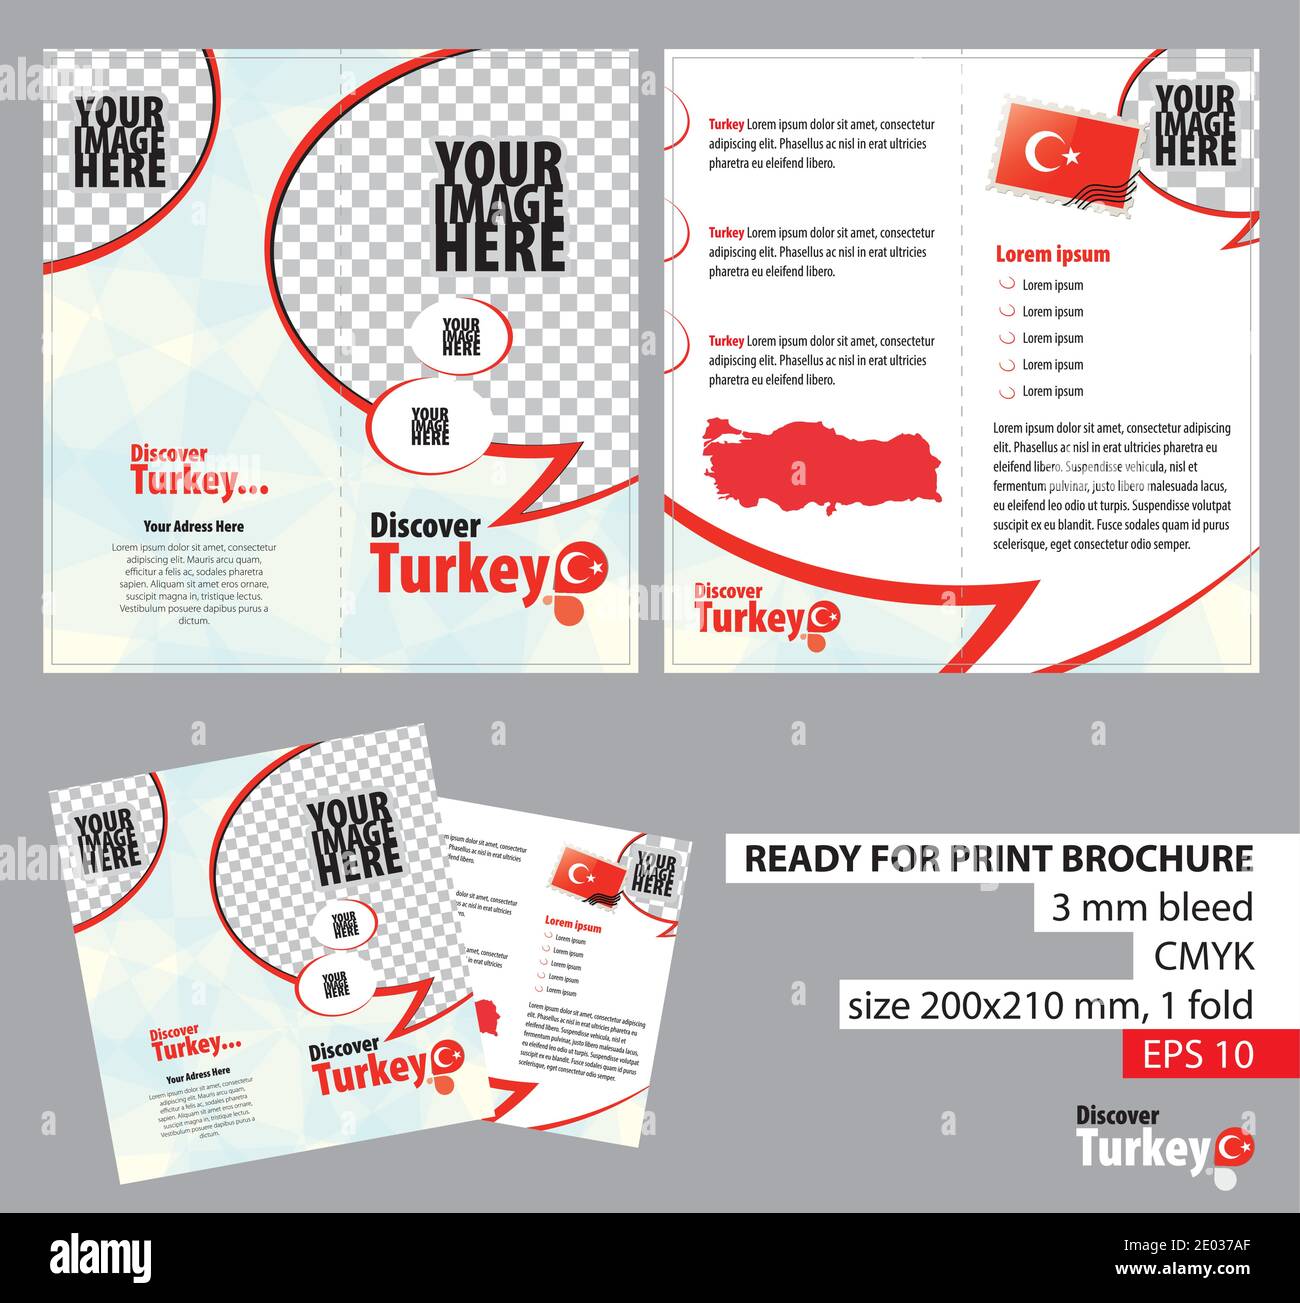 Brochure Design Template, Discover Turkey. Ready for Print, 3 mm Bleed. Vector Illustration. Stock Vector